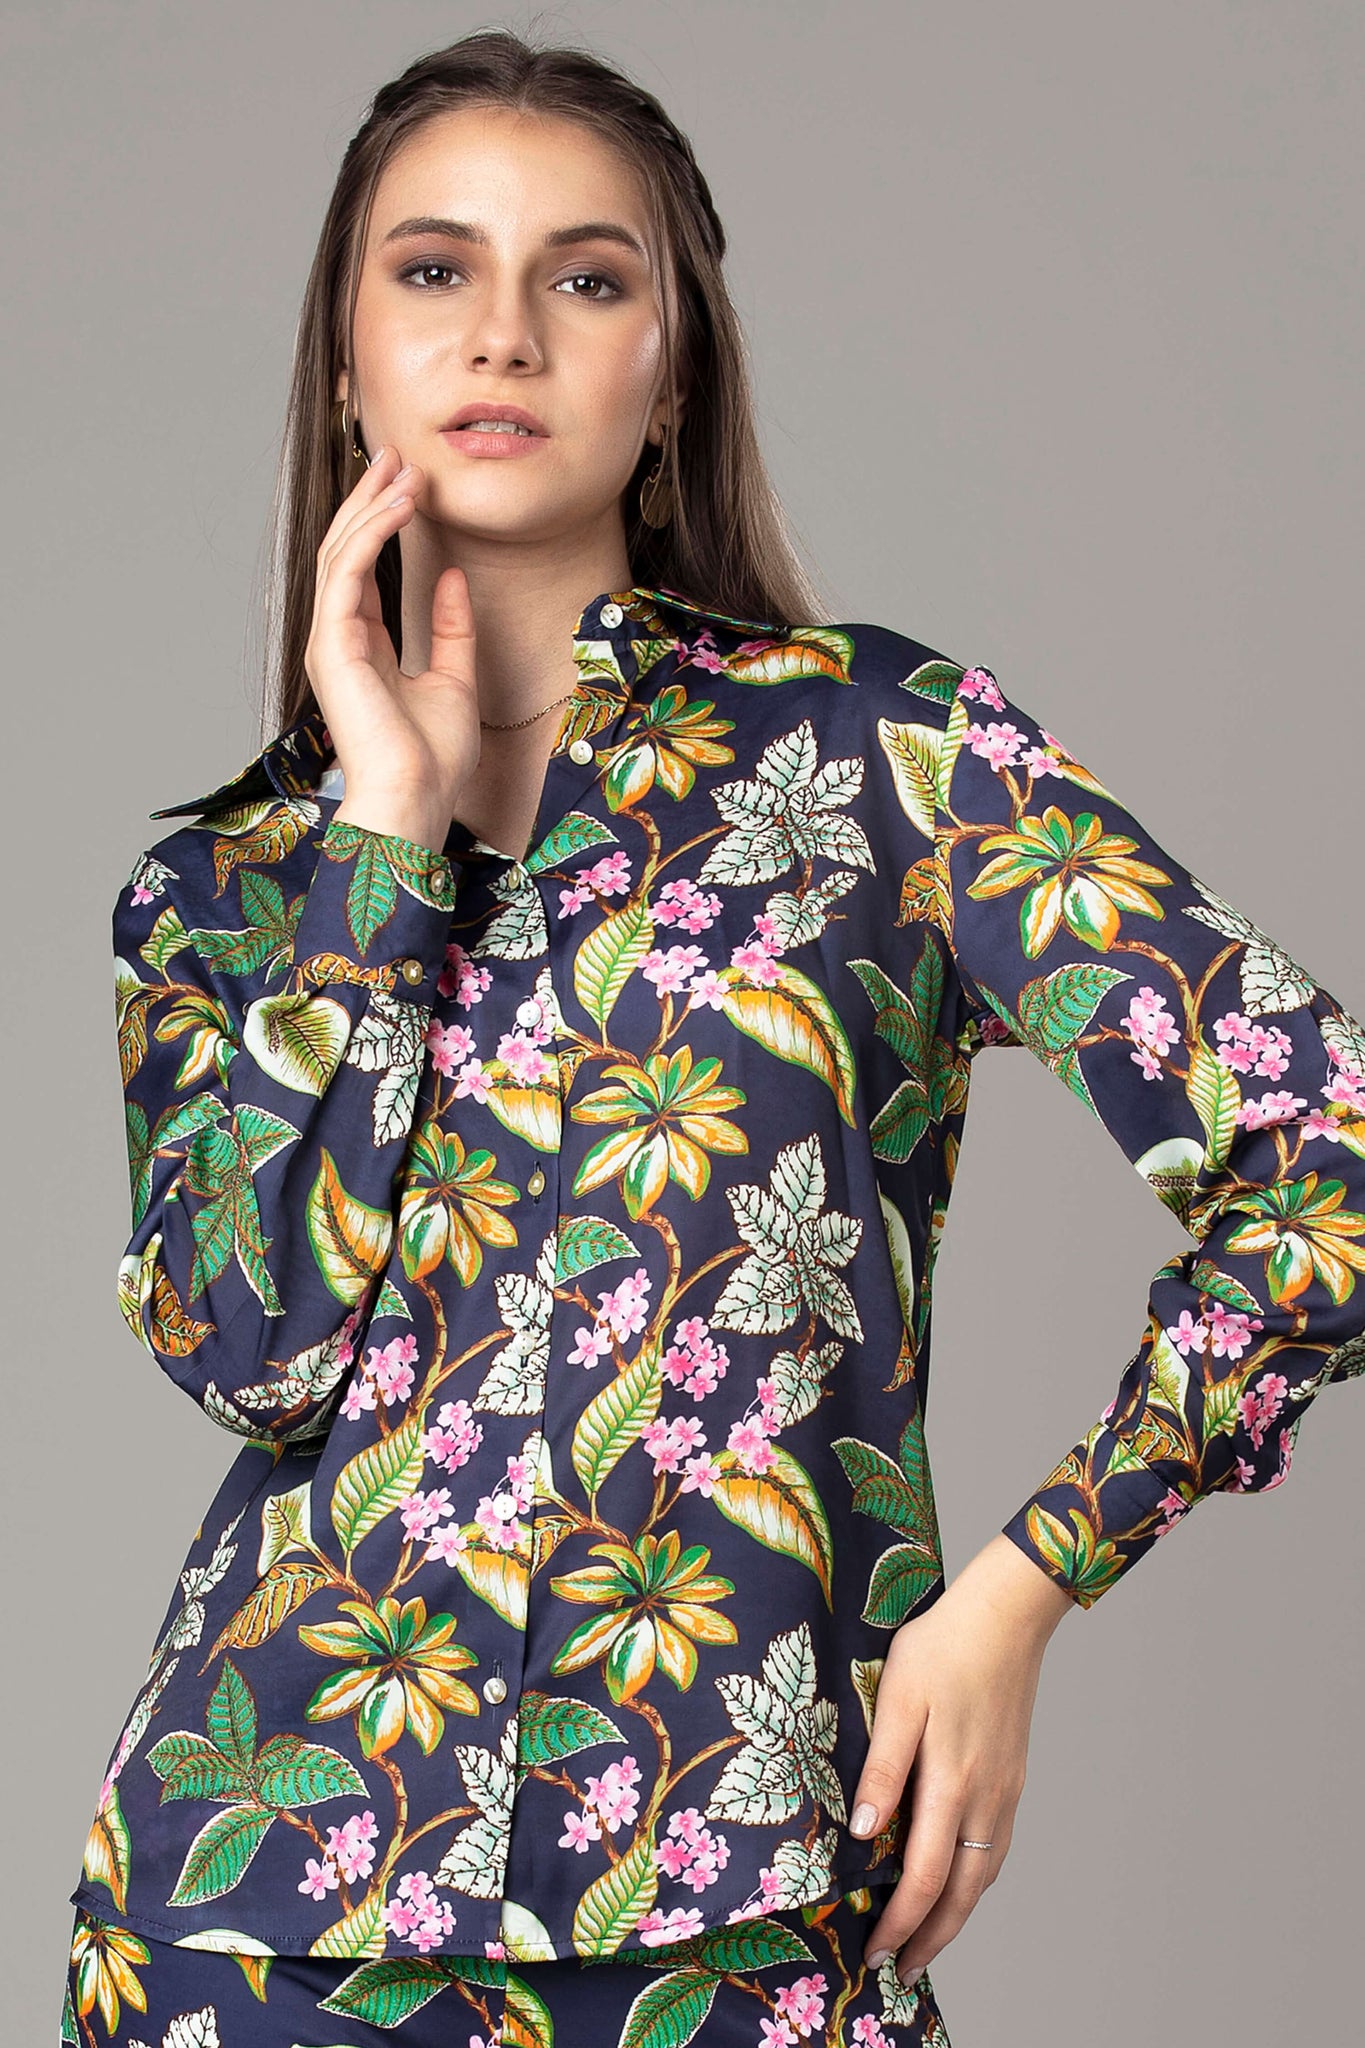 Trendy Floral Shirt For Women